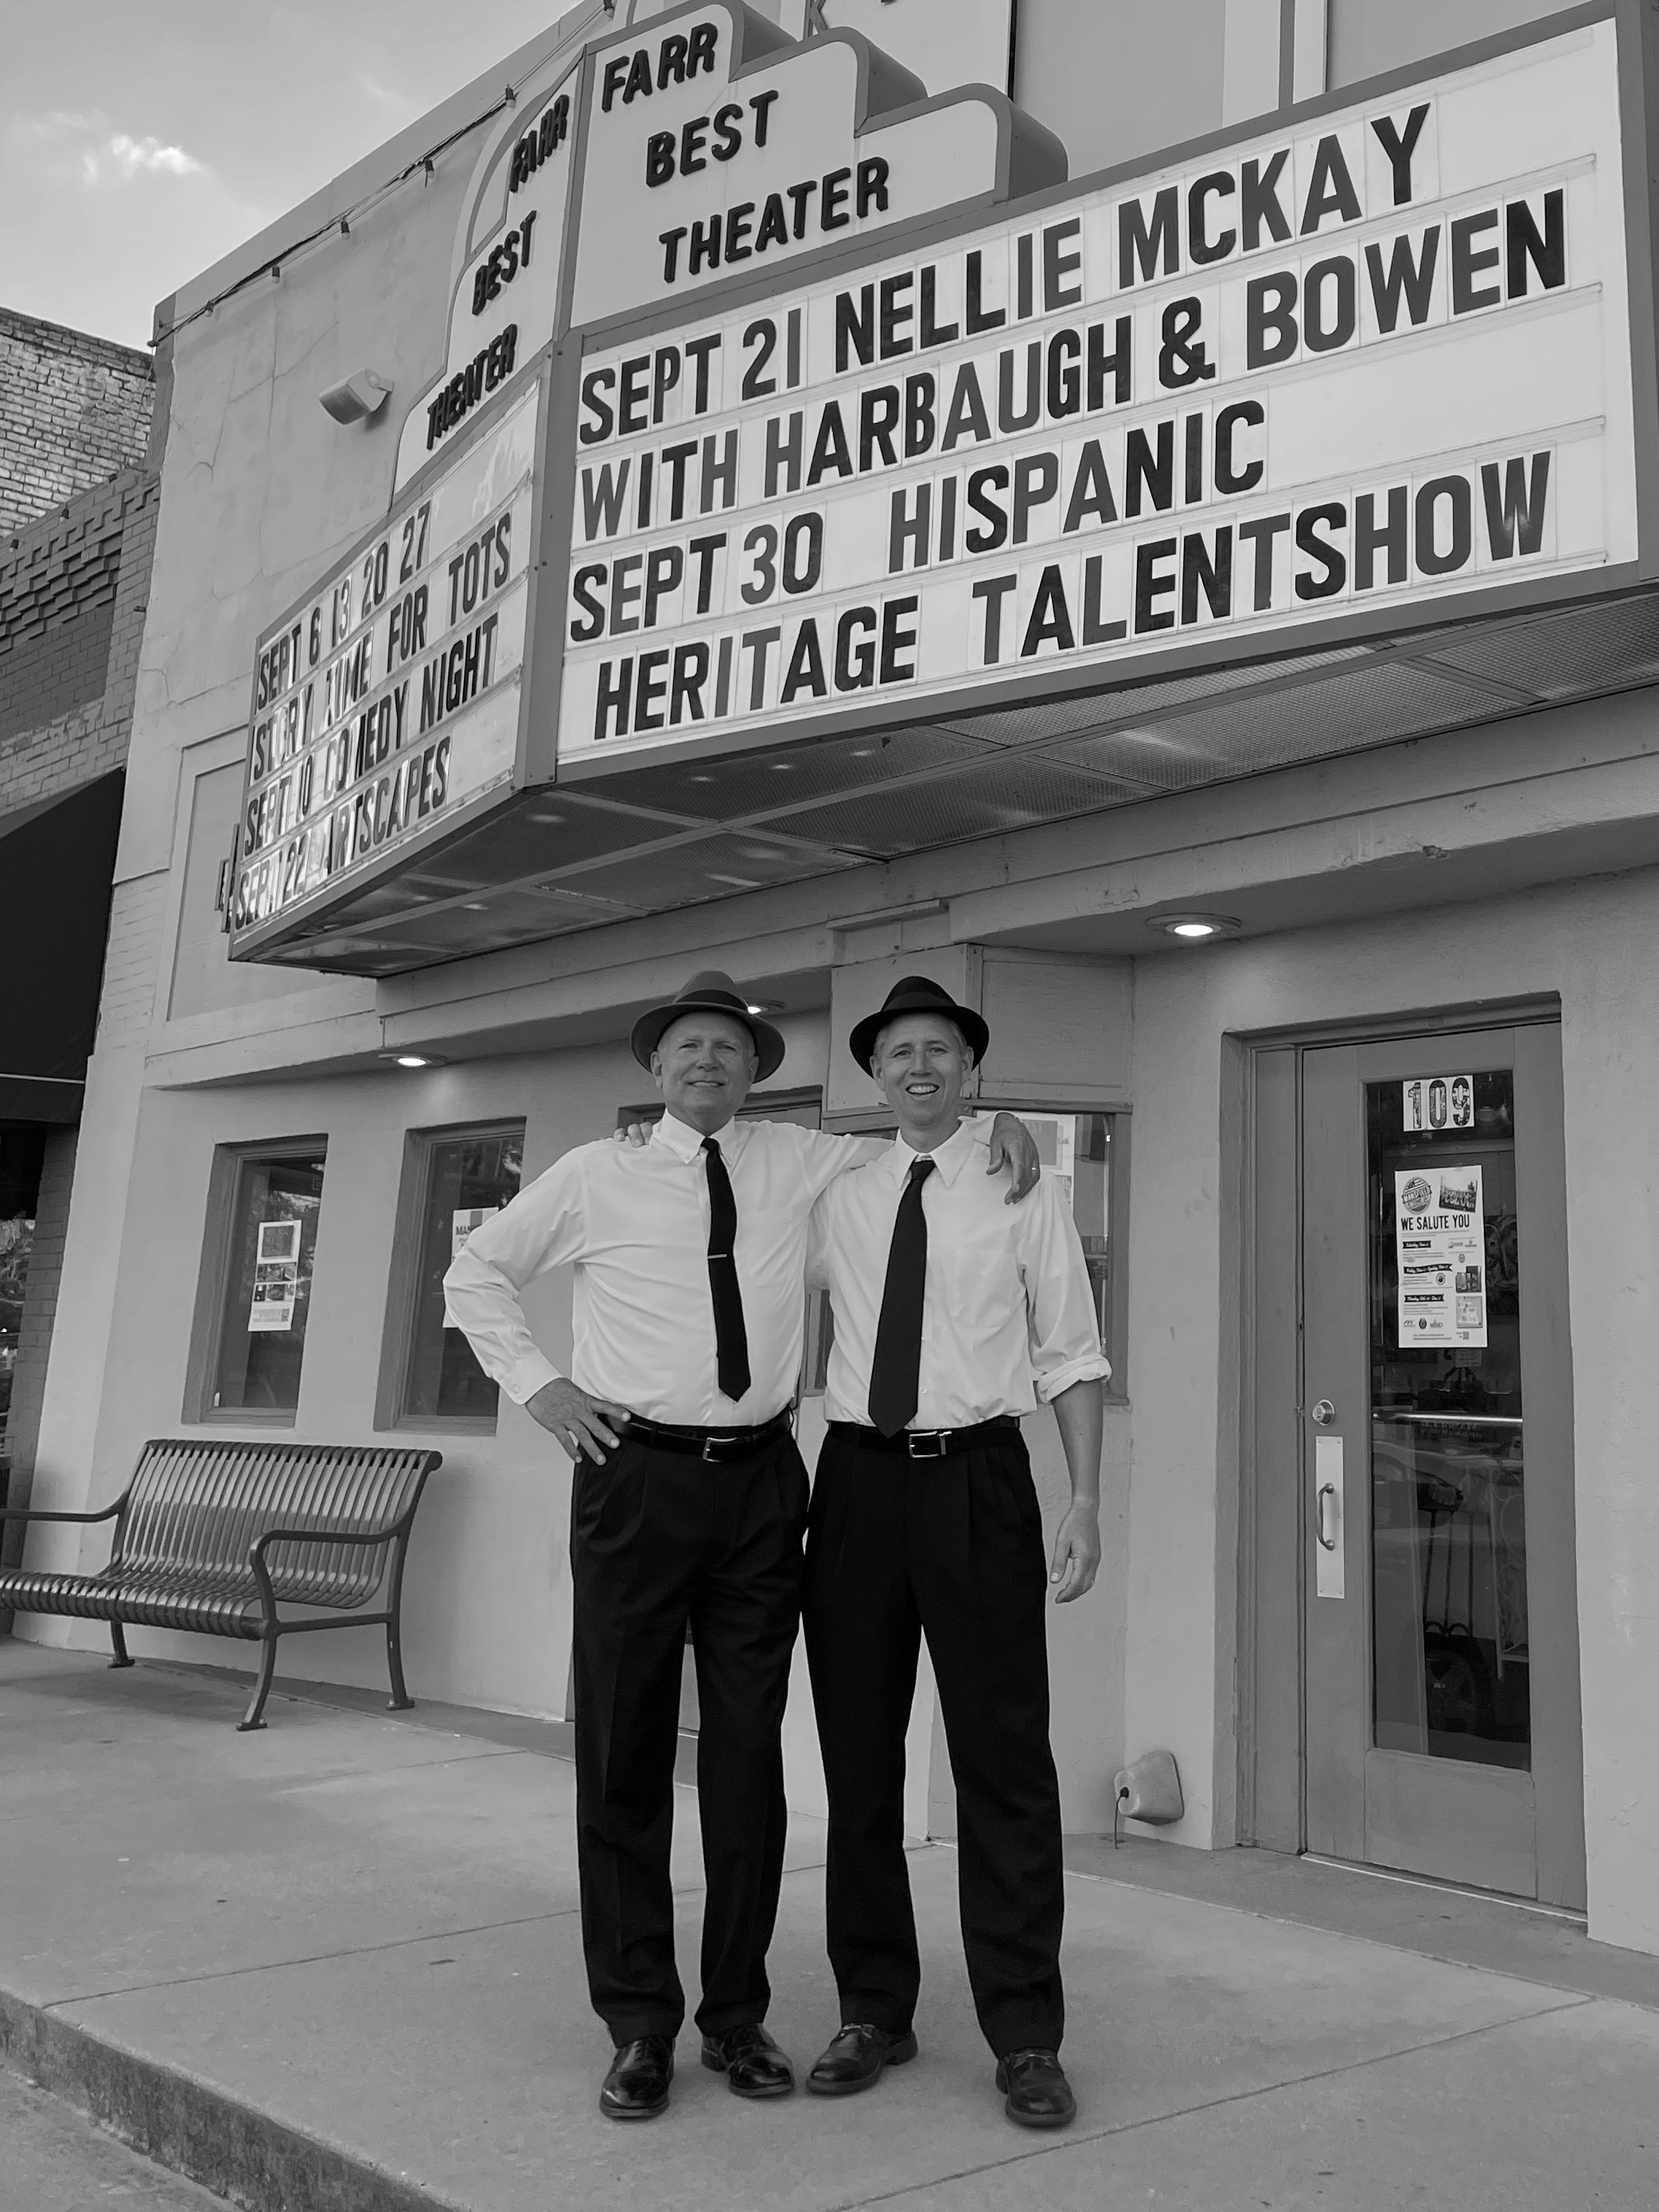 Harbaugh and Bowen standing in front of the Farr Best Theater in Mansfield, TX